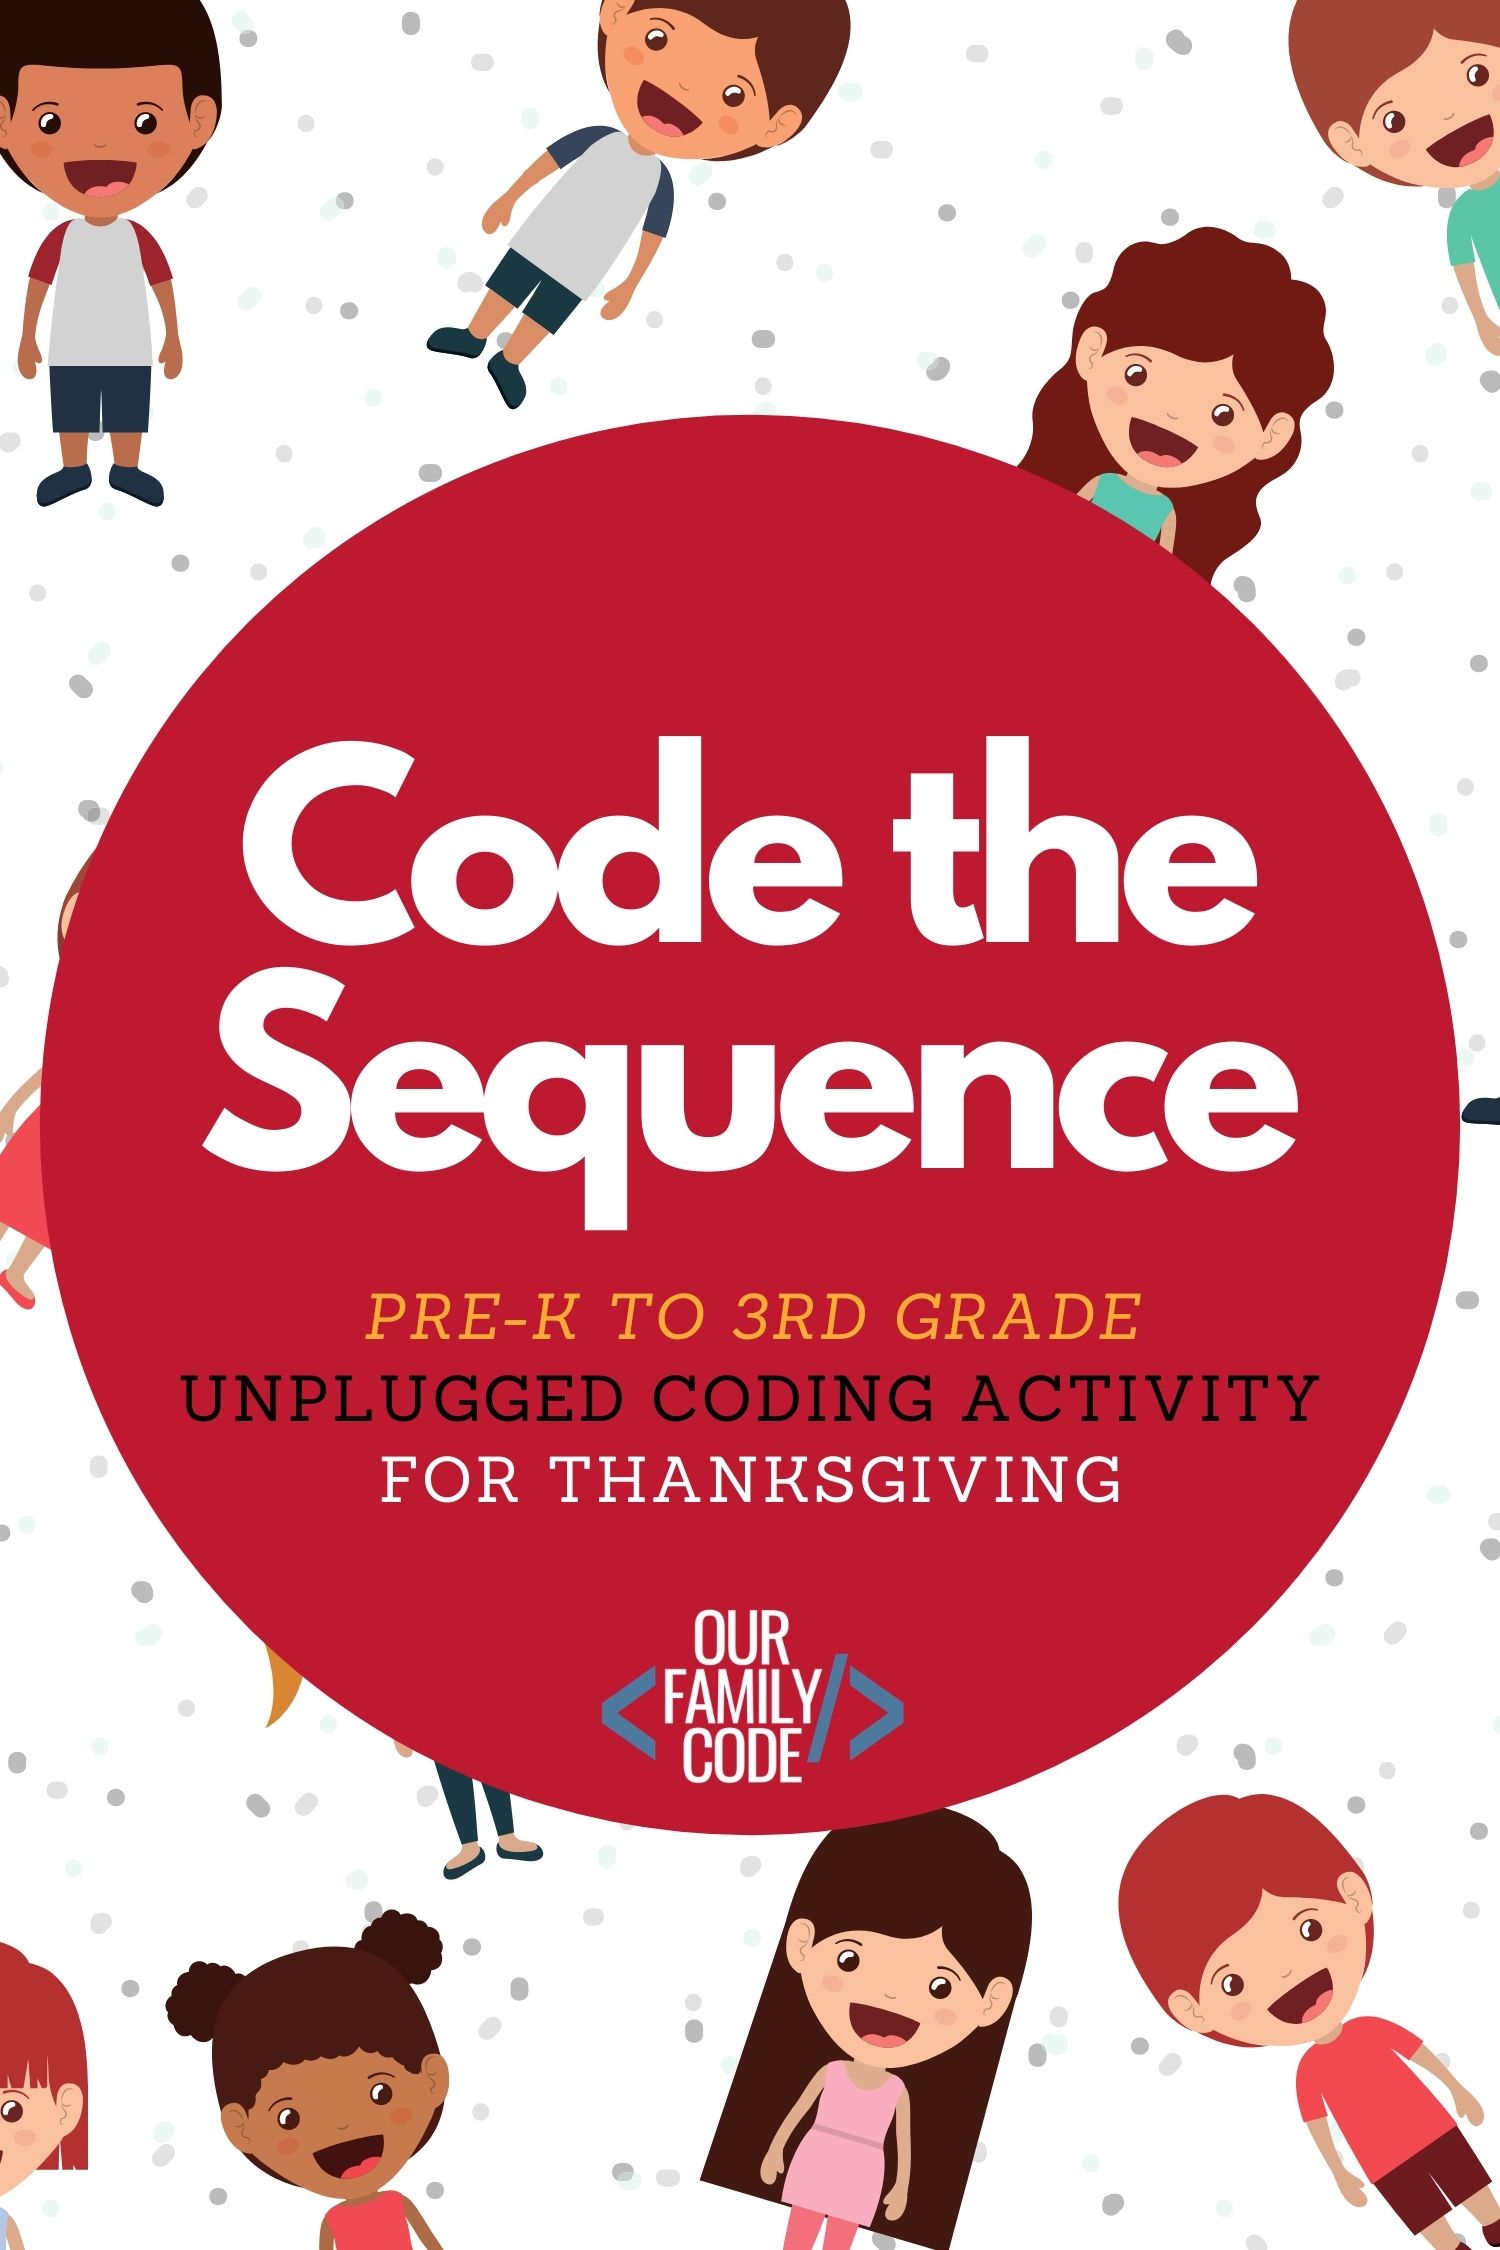 Find the correct sequence to help turkey escape before he becomes Thanksgiving dinner in this unplugged coding worksheet for kids! #teachkidstocode #freeworksheets #thanksgivingactivitiesforkids #STEM #STEAM #unpluggedcoding #hourofcode